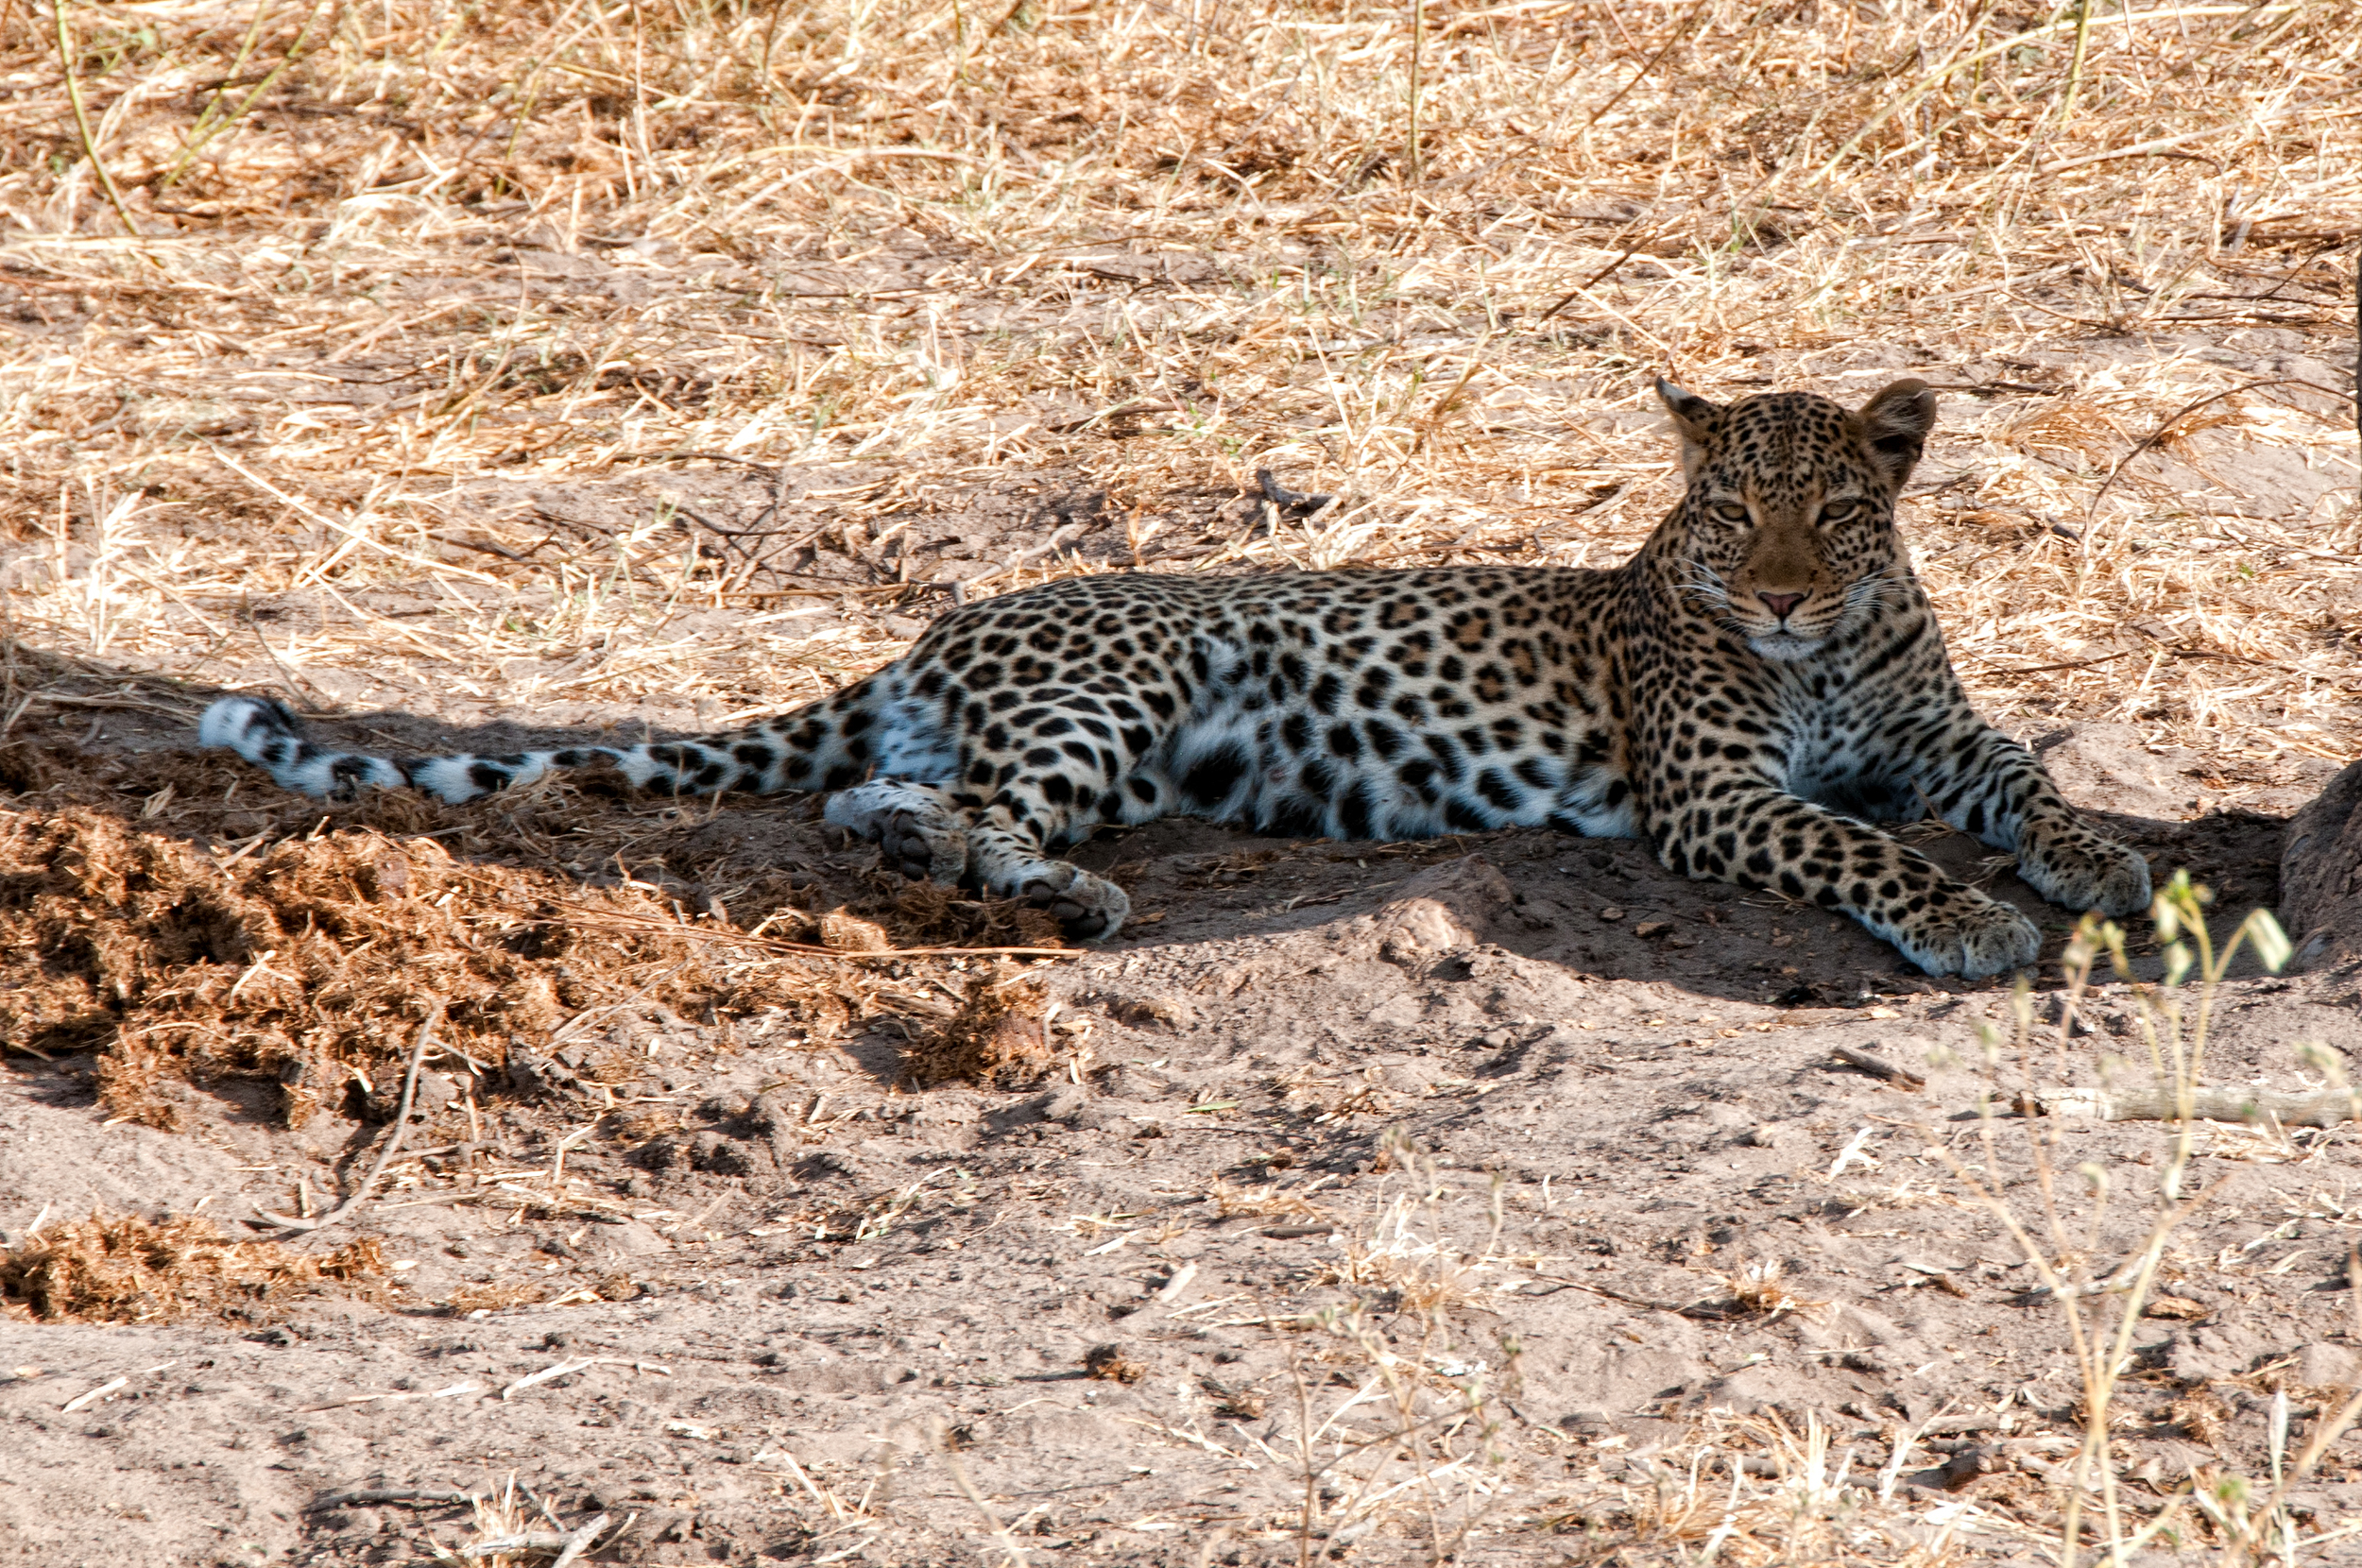 Leopard, in the shade, Chobe River